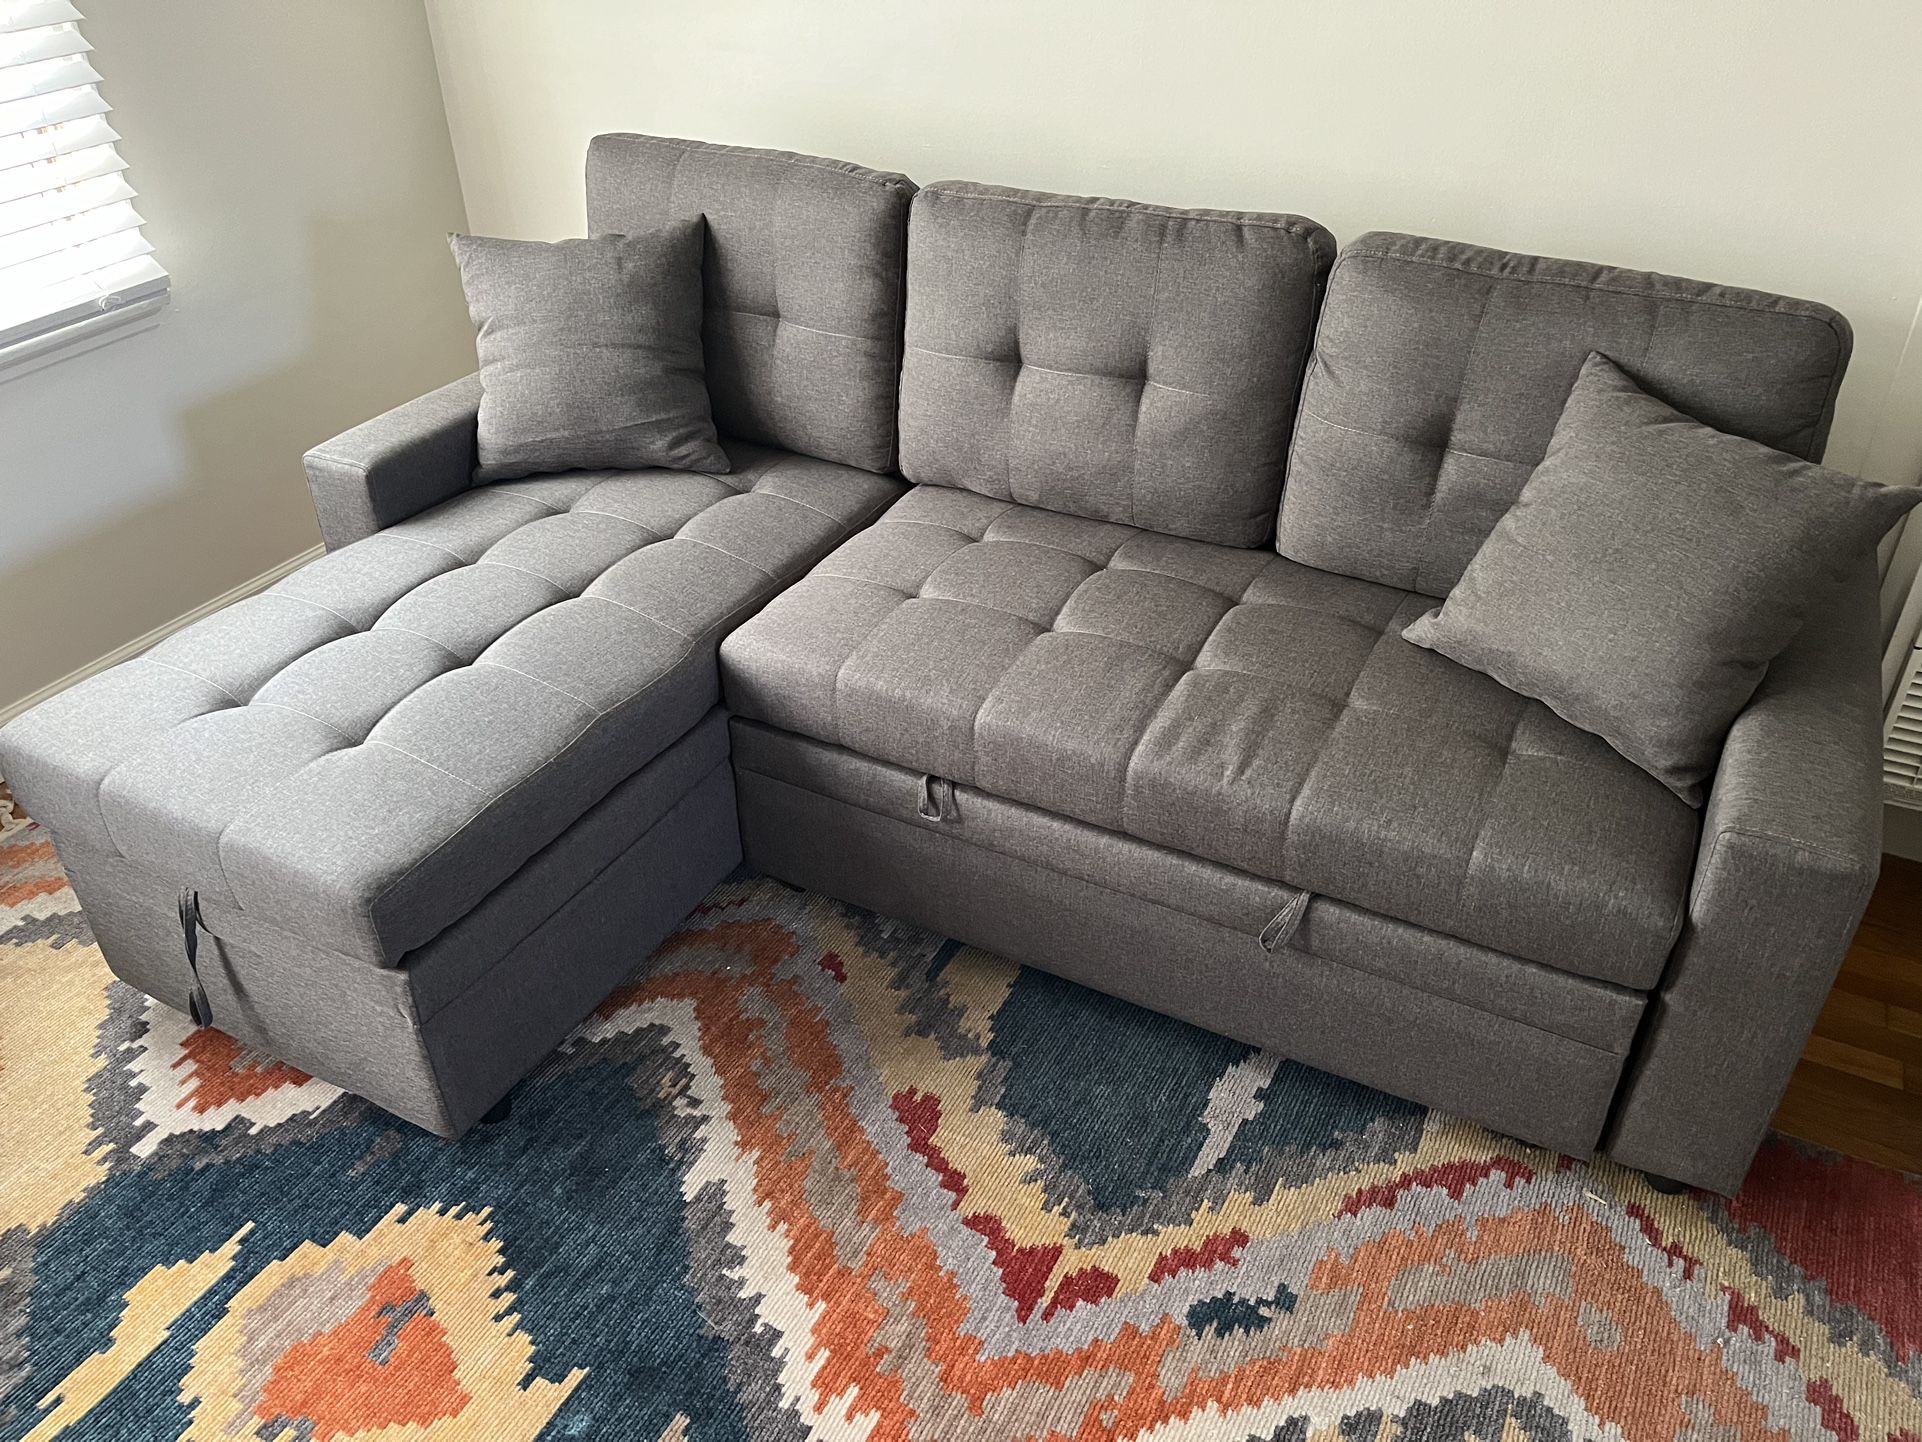 1-Day Old Sleeper Sectional